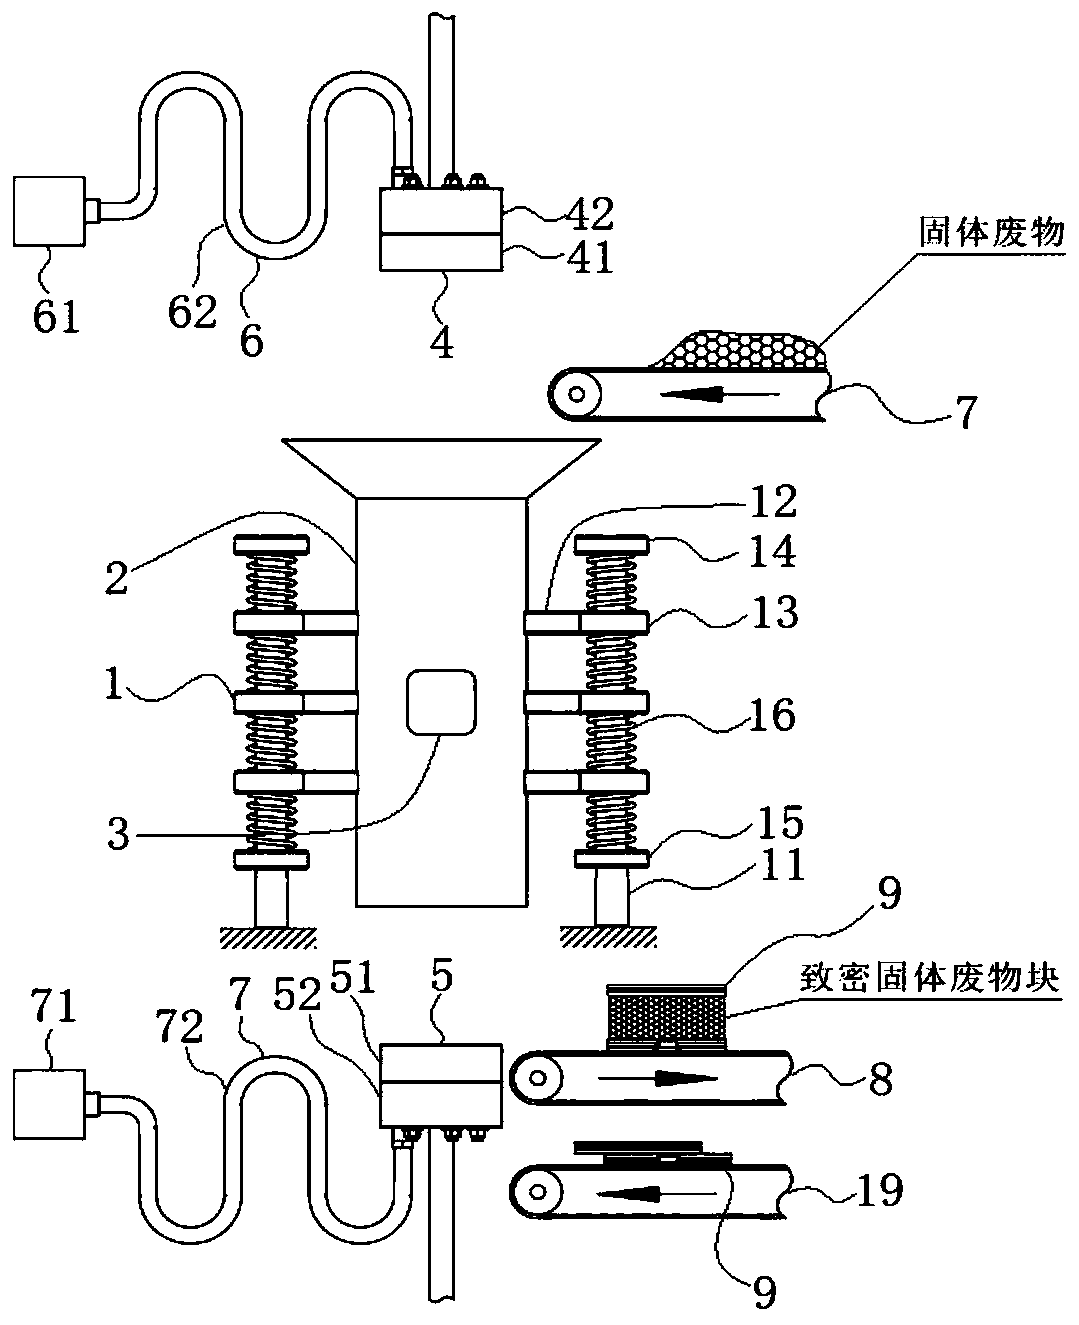 Solid waste compact treatment system and method adopting vibration, negative pressure and thermalization technologies